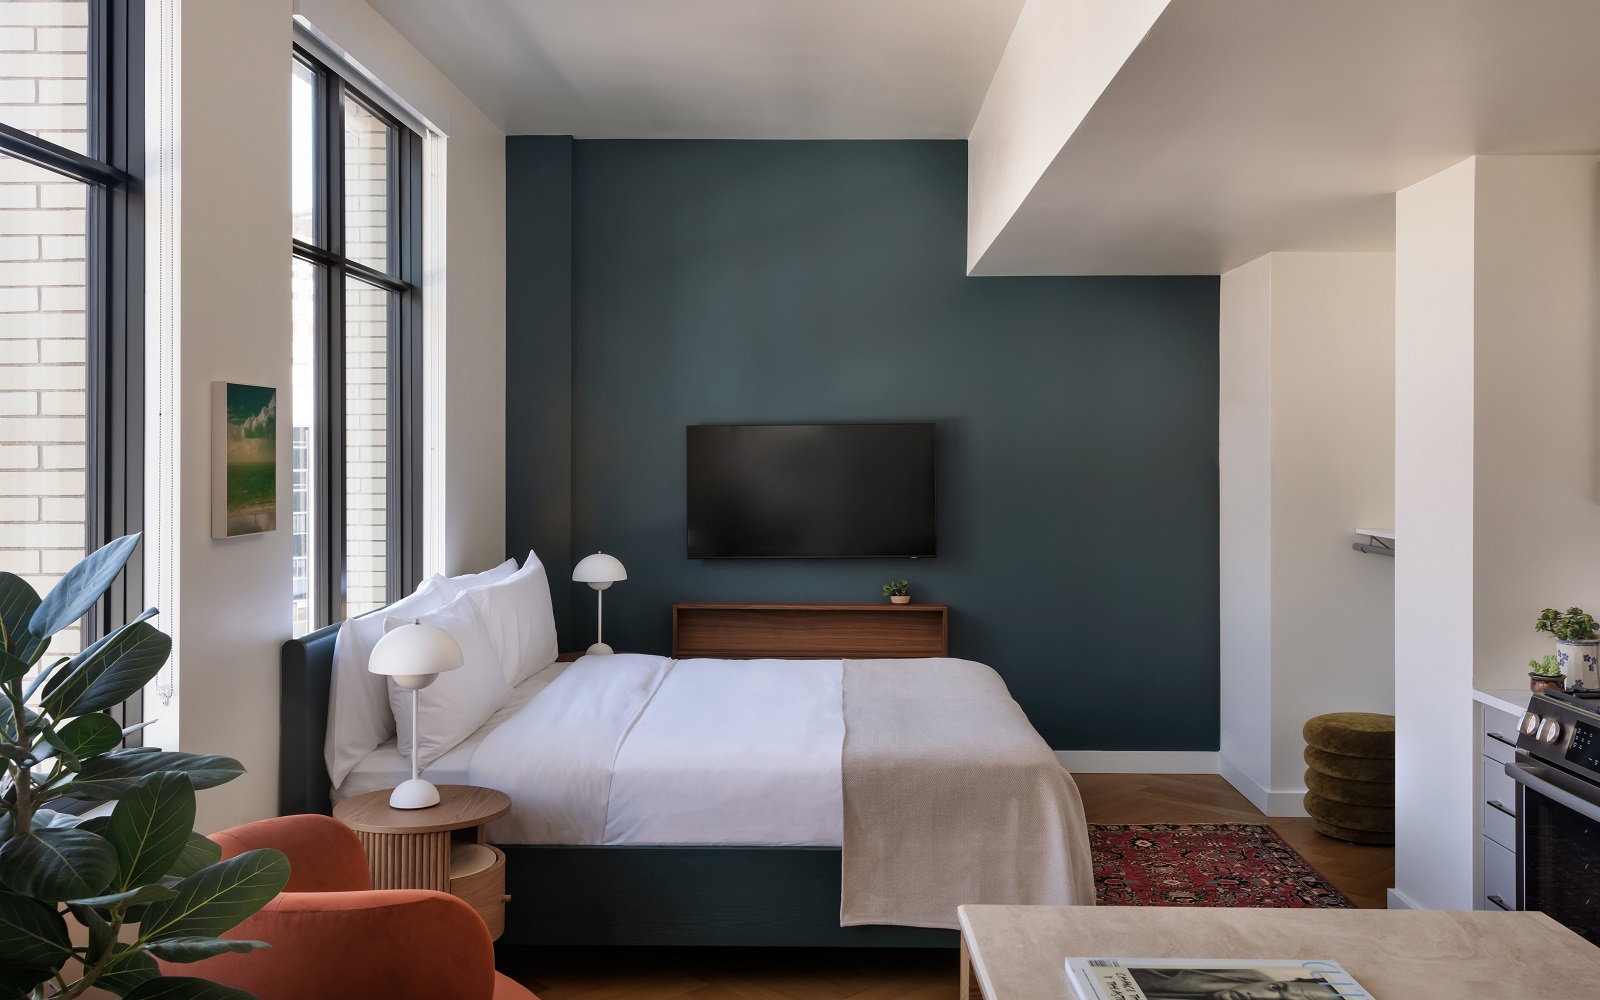 aparthotel guestroom suite with bed in front of dark blue wall and plants in the foreground